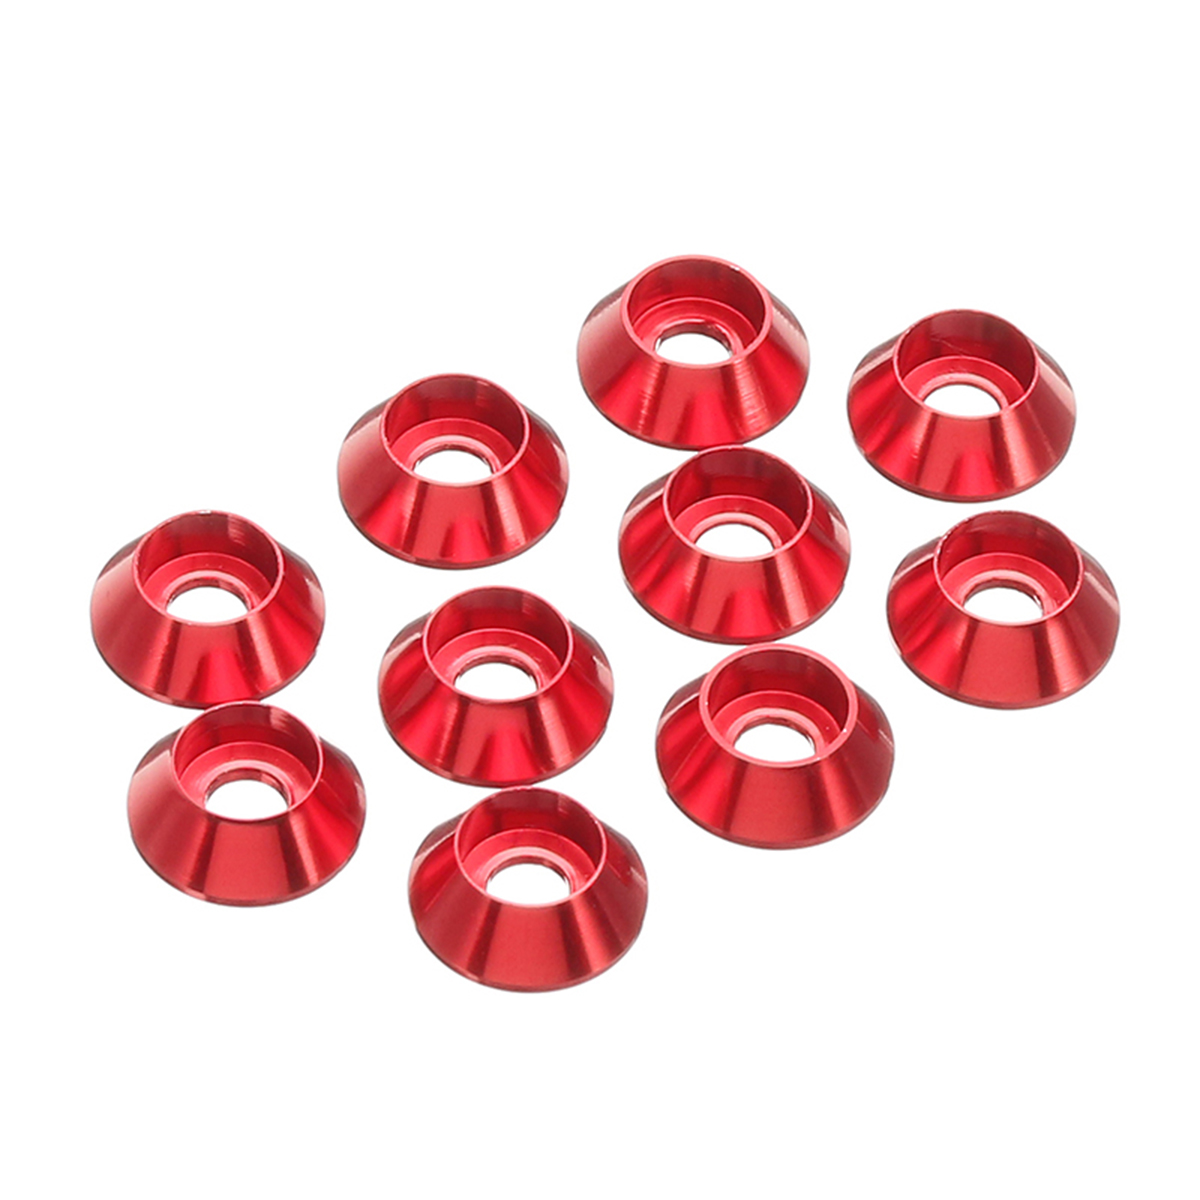 Sulevetrade-M5AN2-10Pcs-M5-Cup-Head-Hex-Screw-Gasket-Washer-Nuts-Aluminum-Alloy-Multicolor-1535744-7